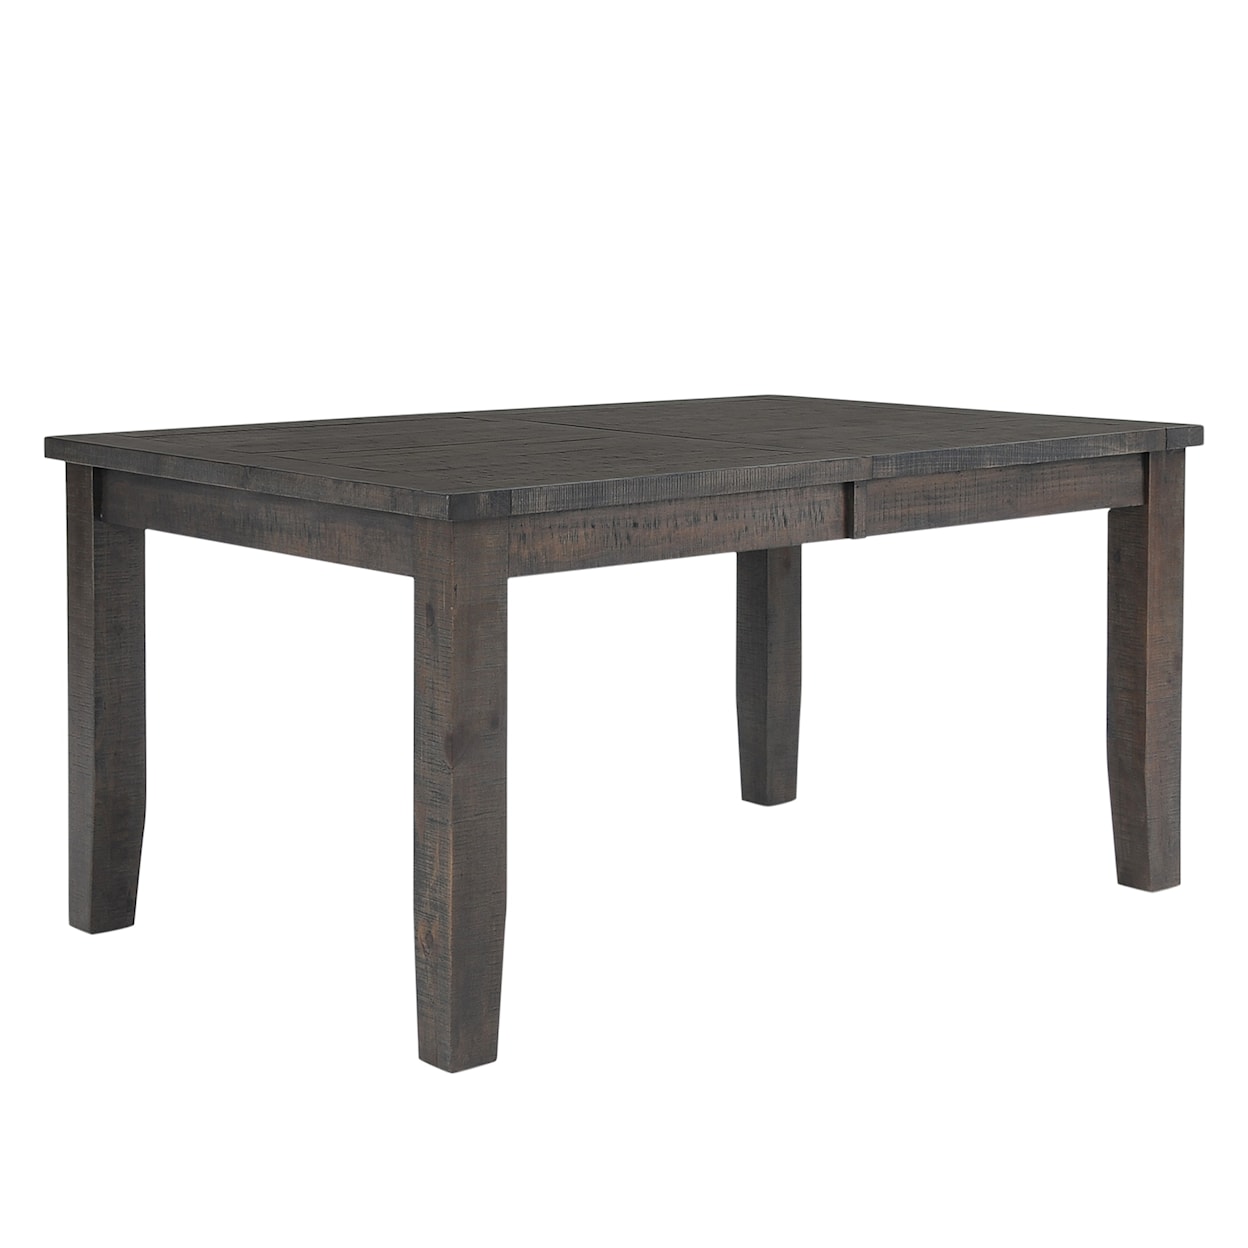 VFM Signature Willow Creek Extension Dining Table